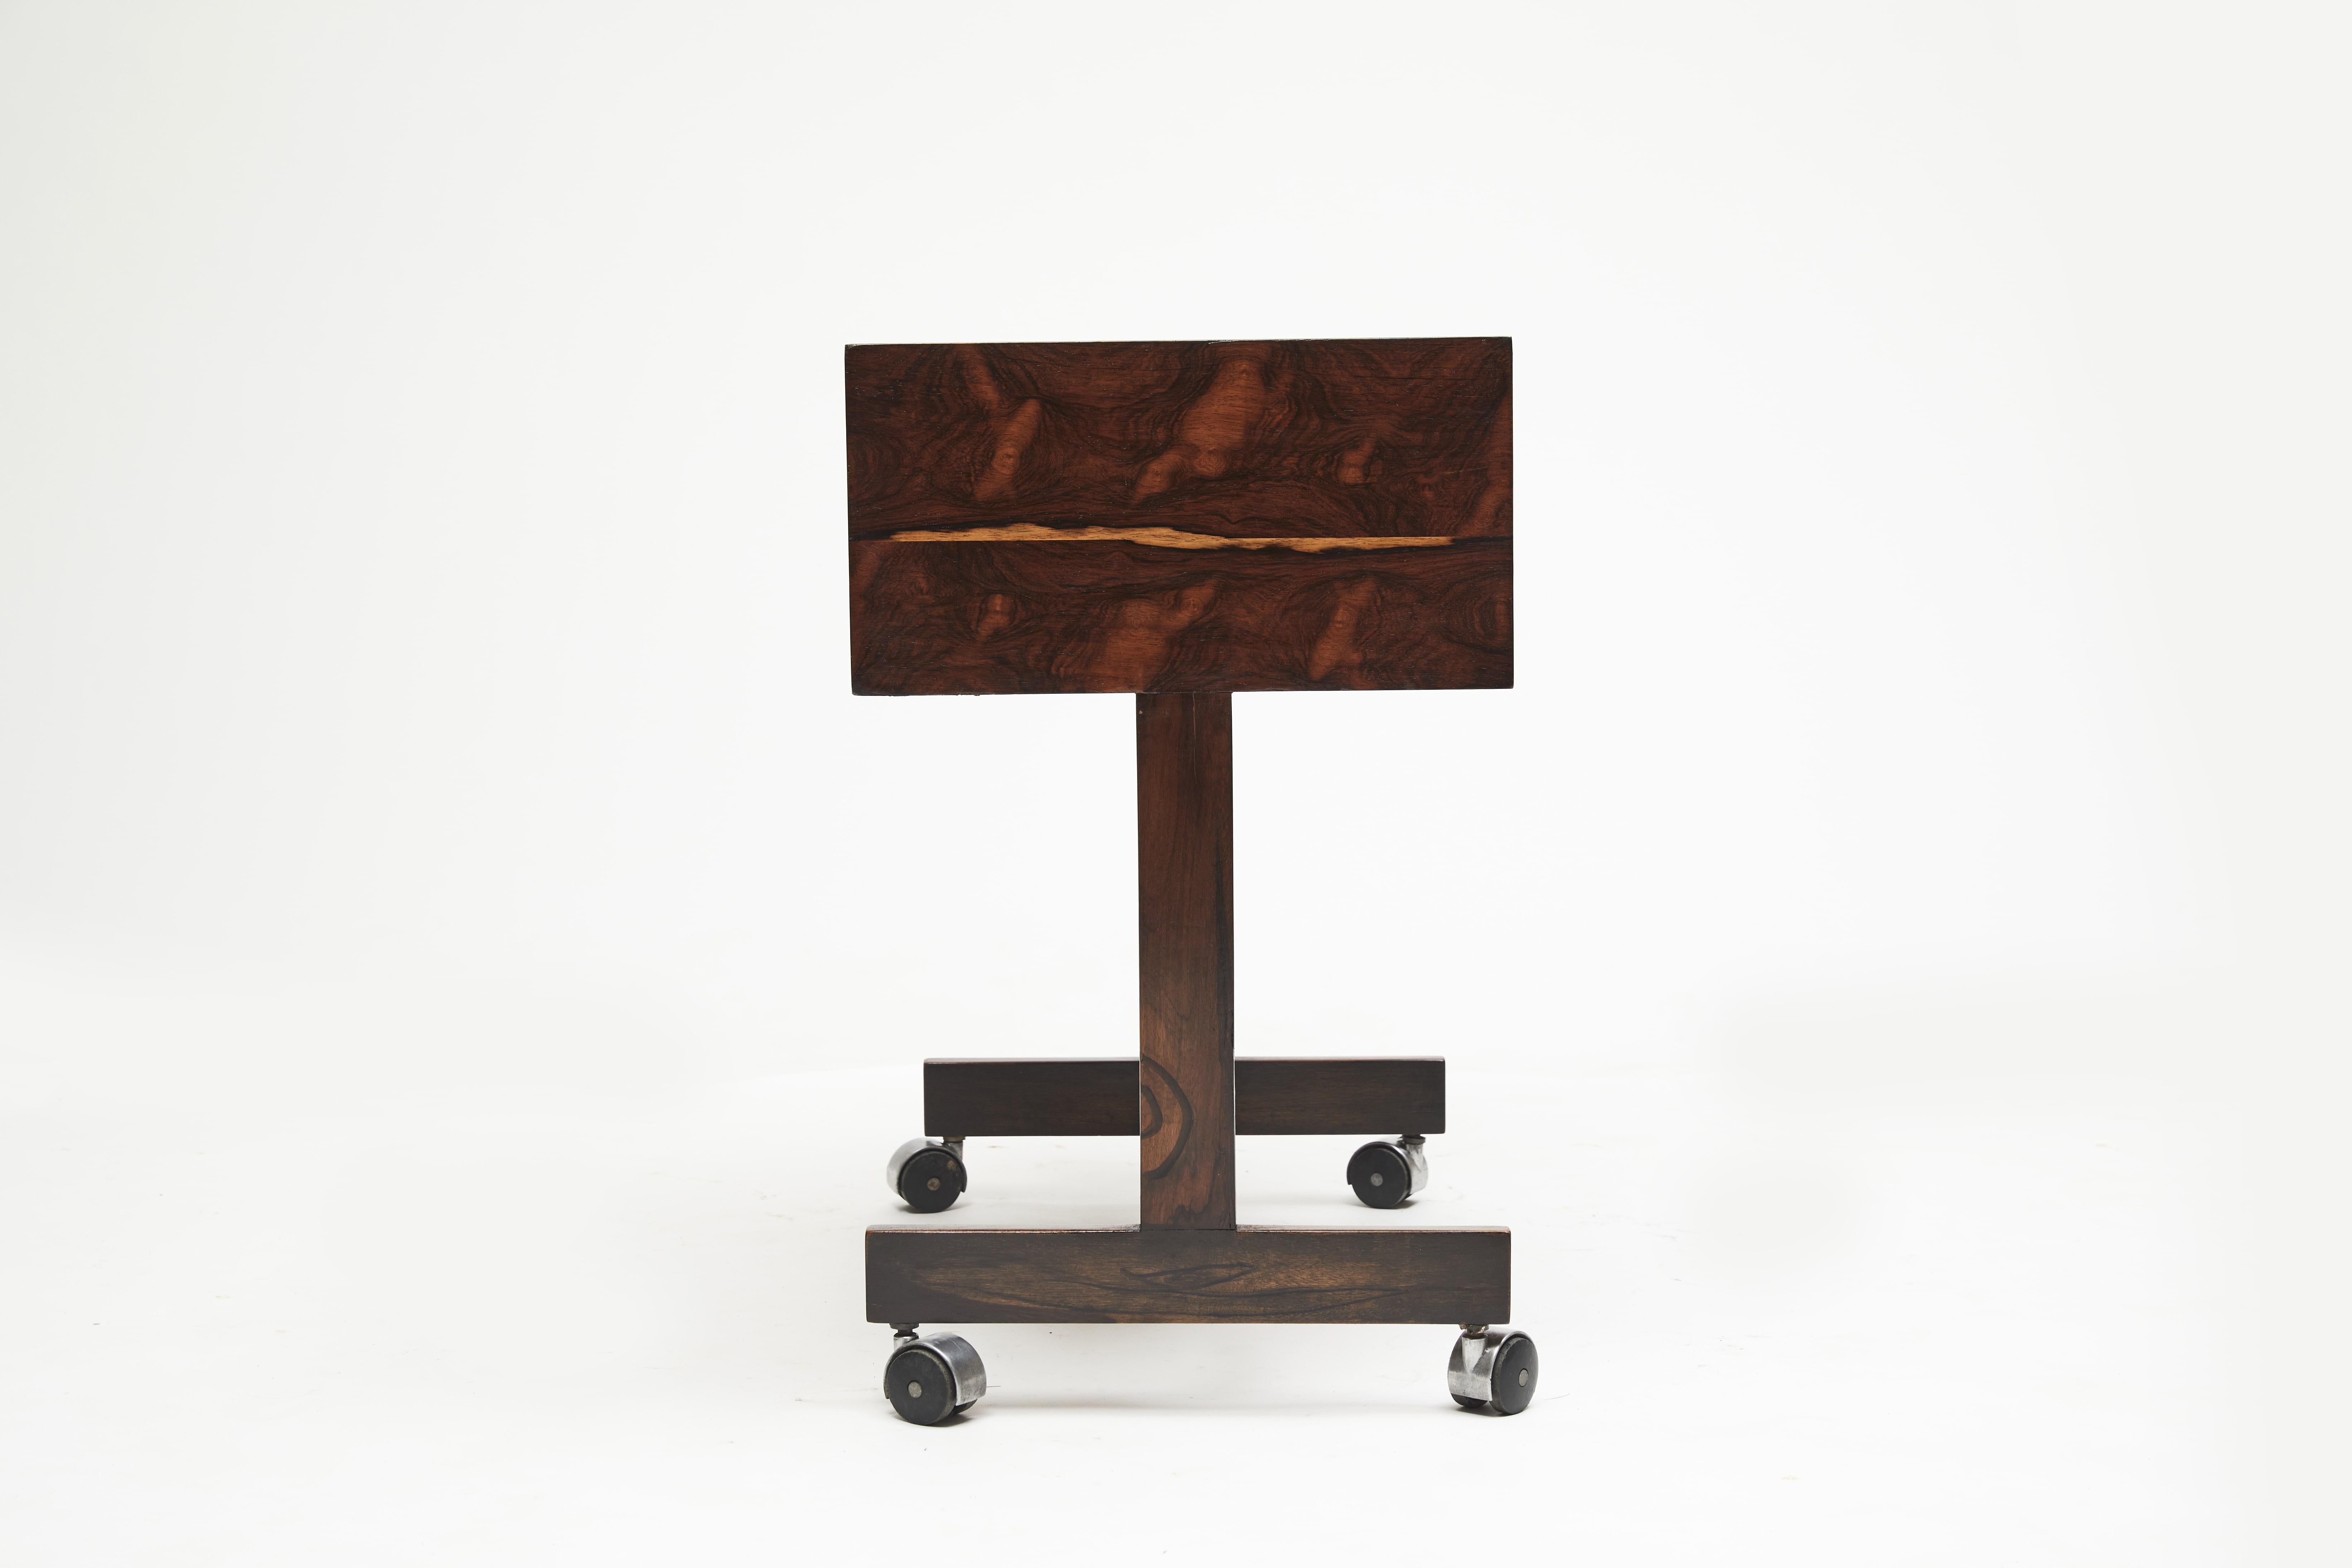 Brazilian Mid-Century Modern Console in Hardwood & Chrome Wheels, Sergio Rodrigues, 1960s For Sale